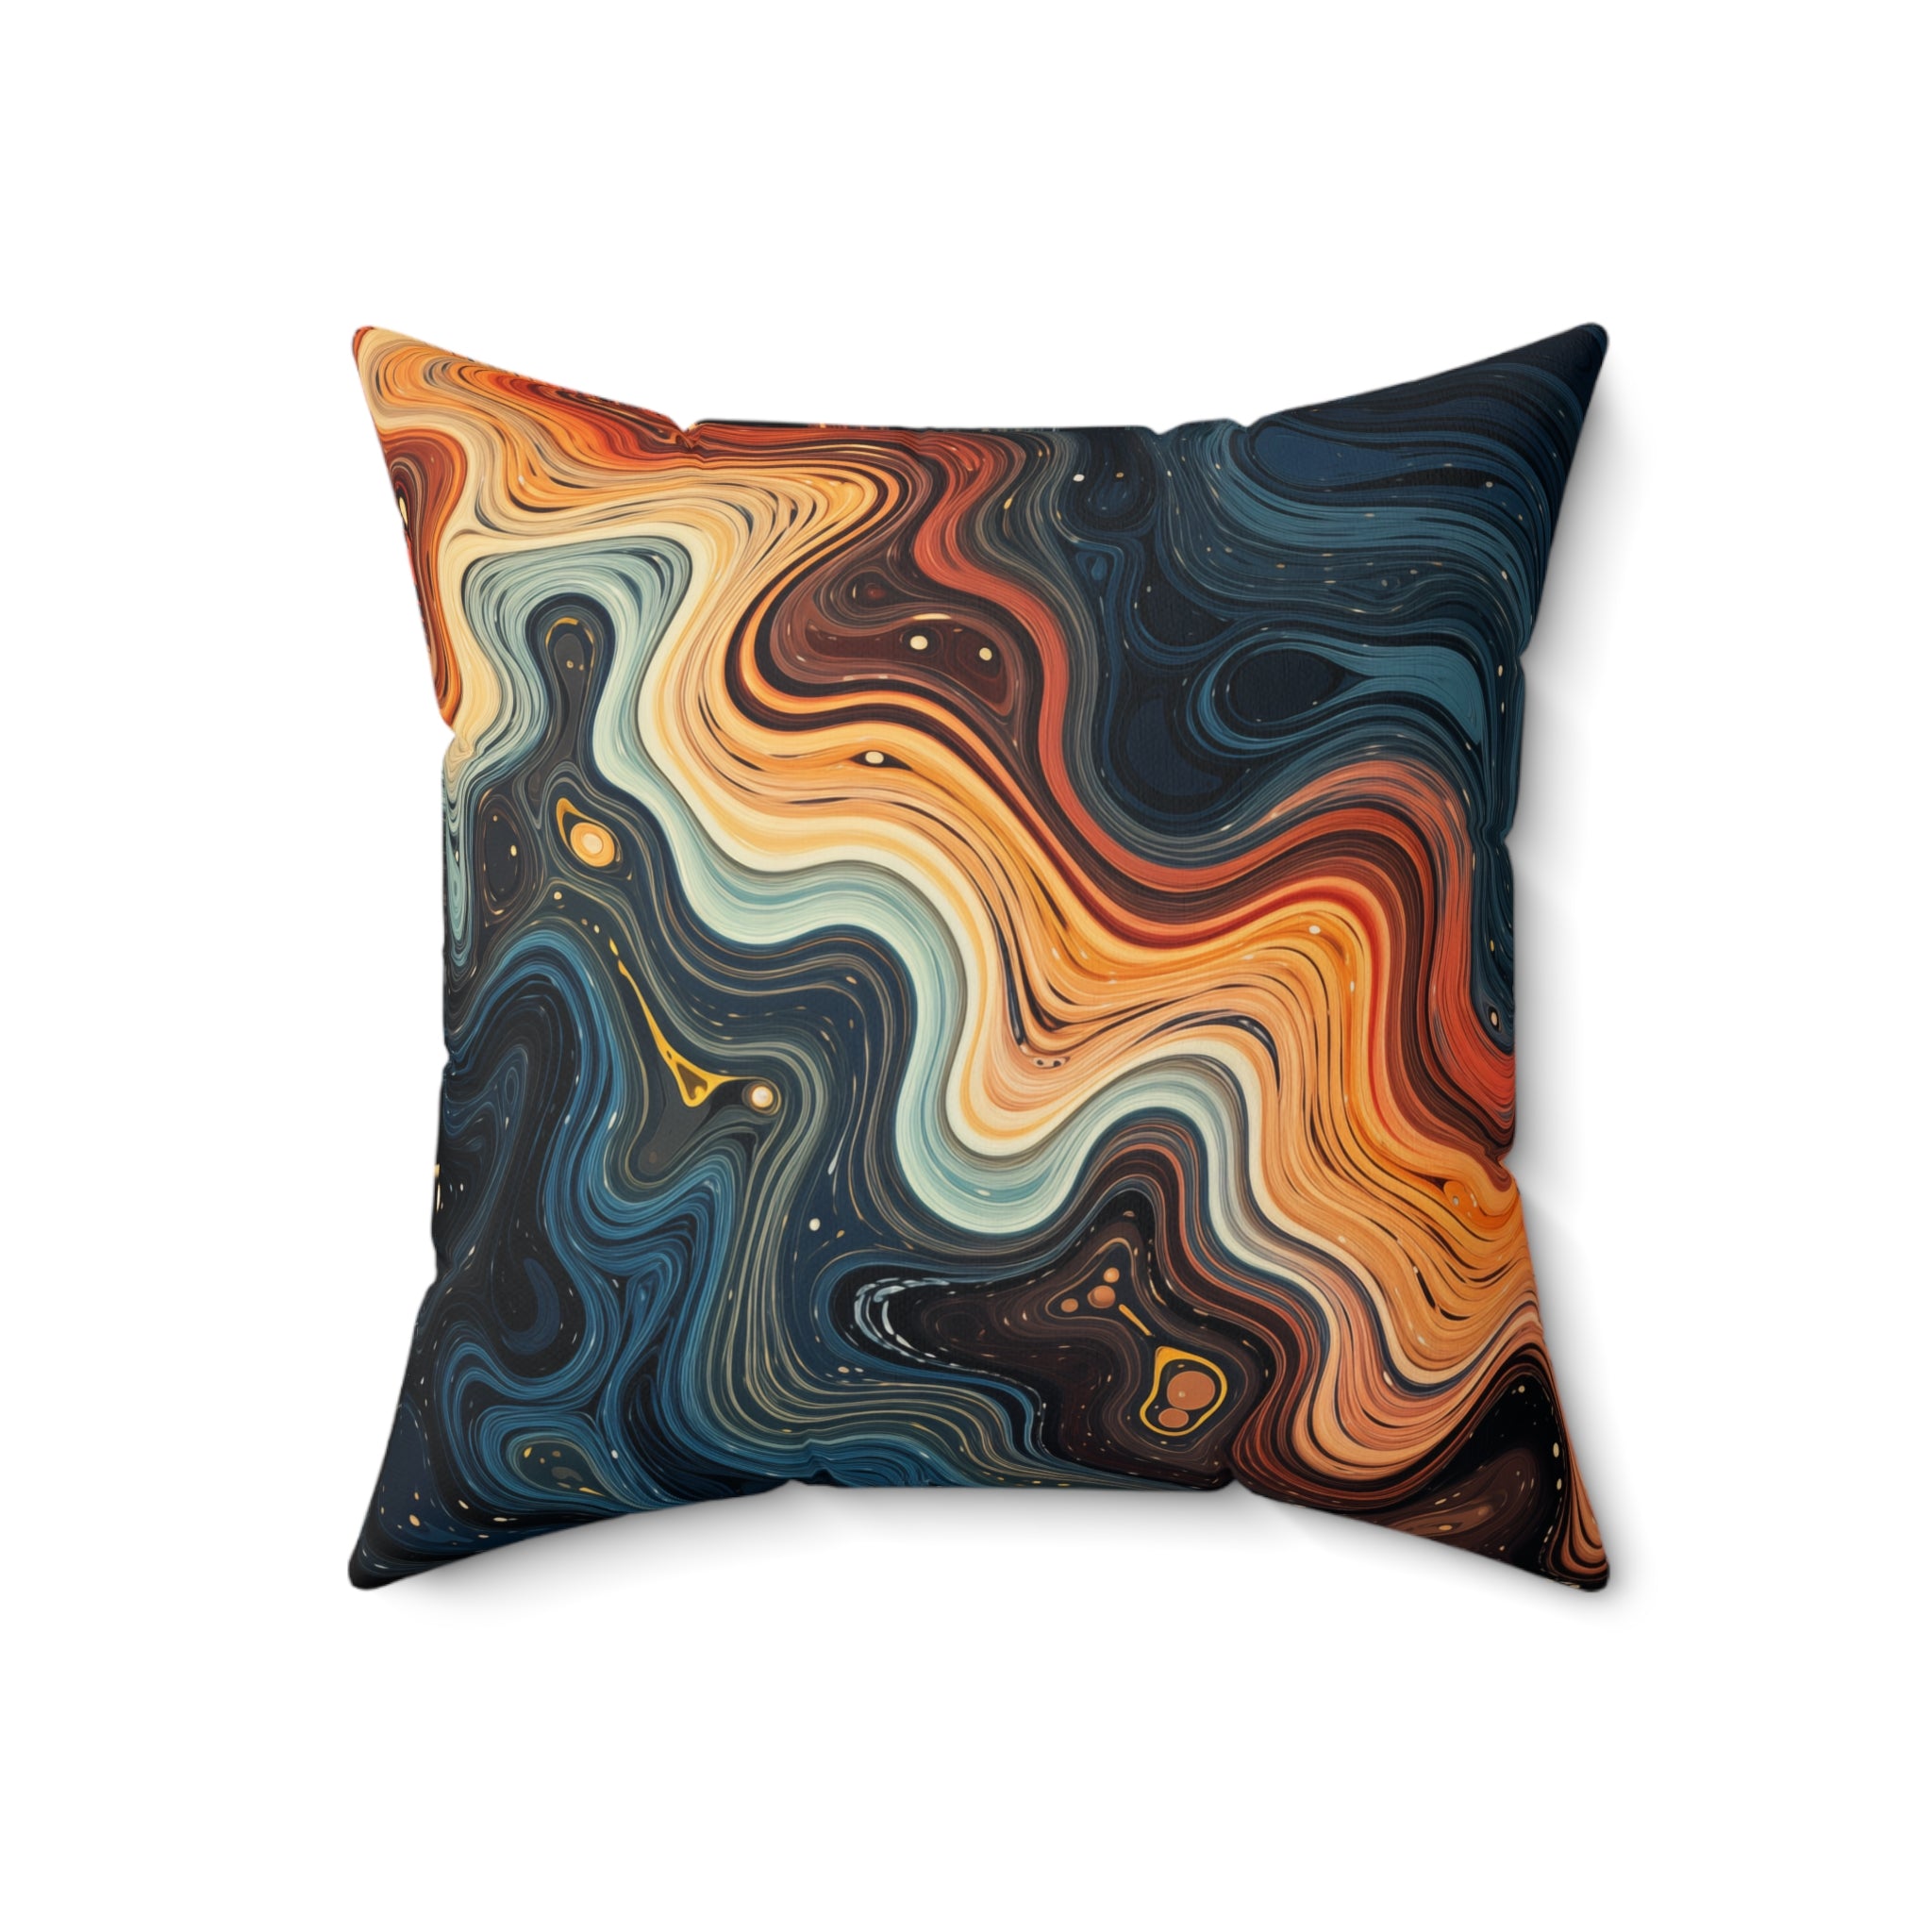 Cosmic Canvas - Square Pillow